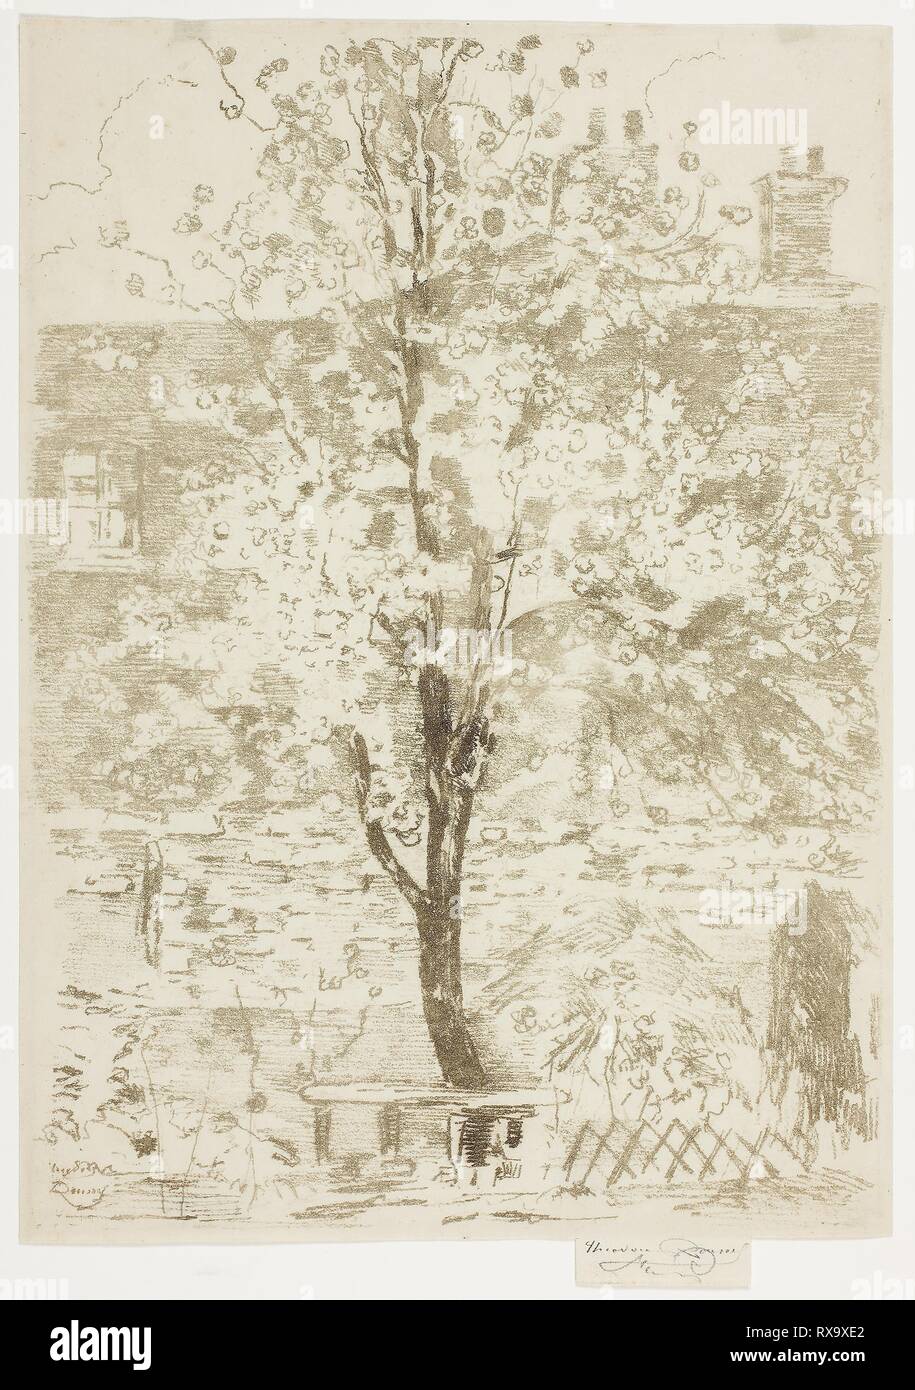 Spring. Theodore Roussel; French, worked in England, 1847-1926. Date: 1906. Dimensions: 248 × 180 mm (image/plate); 256 × 178 mm (sheet). Soft ground etching in olive on cream laid paper. Origin: England. Museum: The Chicago Art Institute. Stock Photo